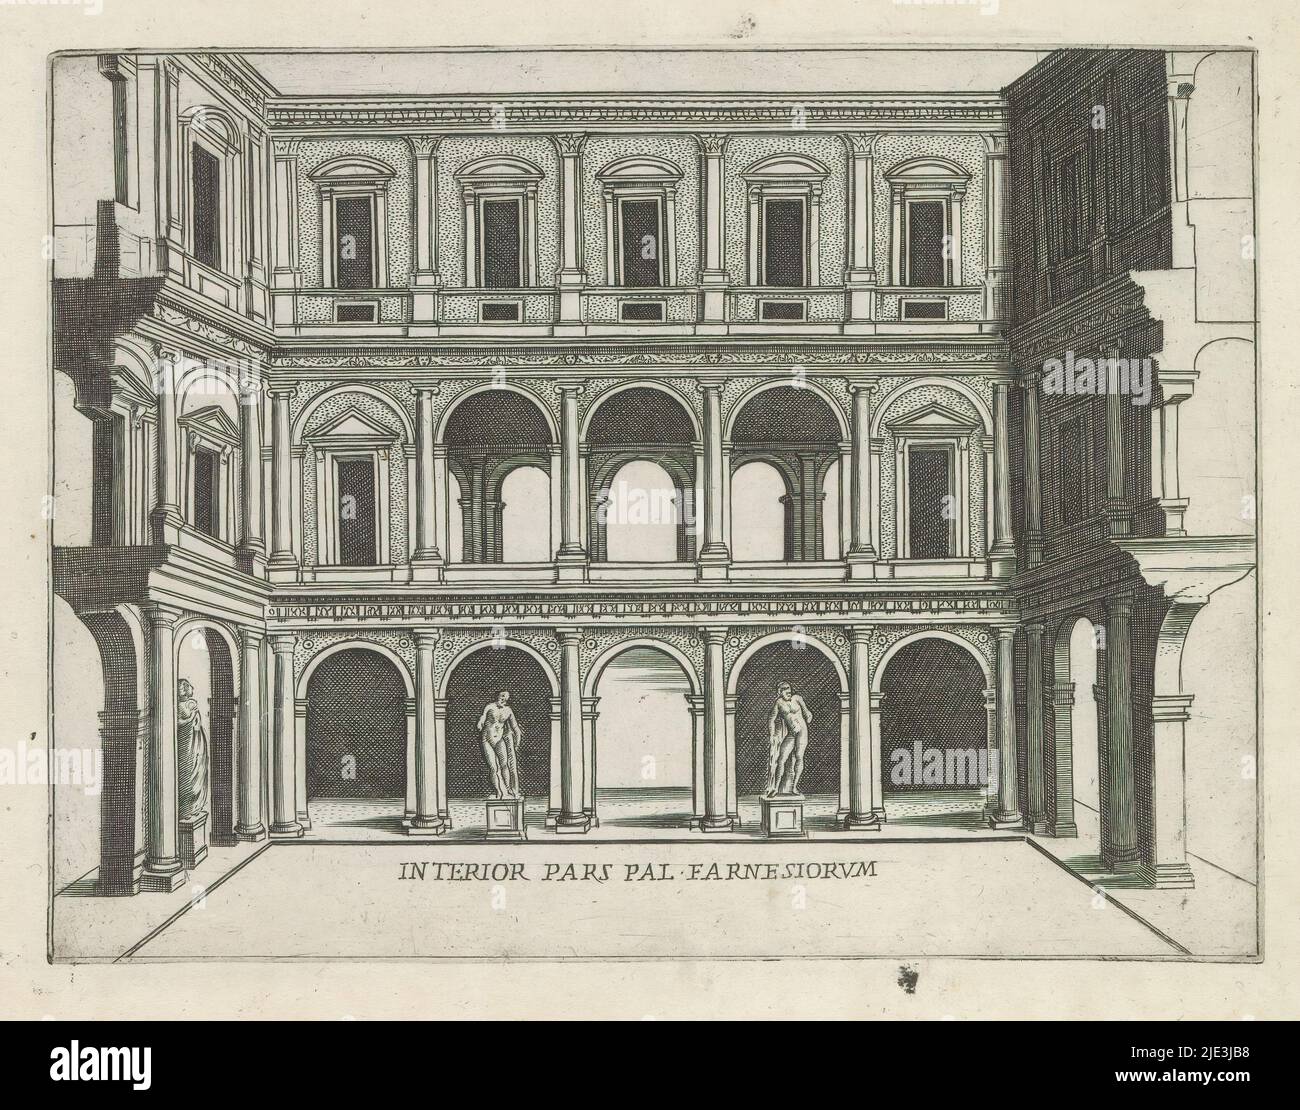 Courtyard of Palazzo Farnese at Rome, Interior pars Pal. Farnesiorum (title on object), Famous buildings in Rome and beyond (series title), Palazzi diversi nel'alma cità di Roma, et altre (series title on object), Print is part of an album., print maker: Giacomo Lauro, after design by: Antonio da Sangallo (II), after design by: Giacomo Barozzi Vignola, print maker: Rome, after design by: Rome, after design by: Rome, after design by: Rome, publisher: Rome, Vaticaanstad, 1638, paper, etching, height 176 mm × width 235 mm Stock Photo